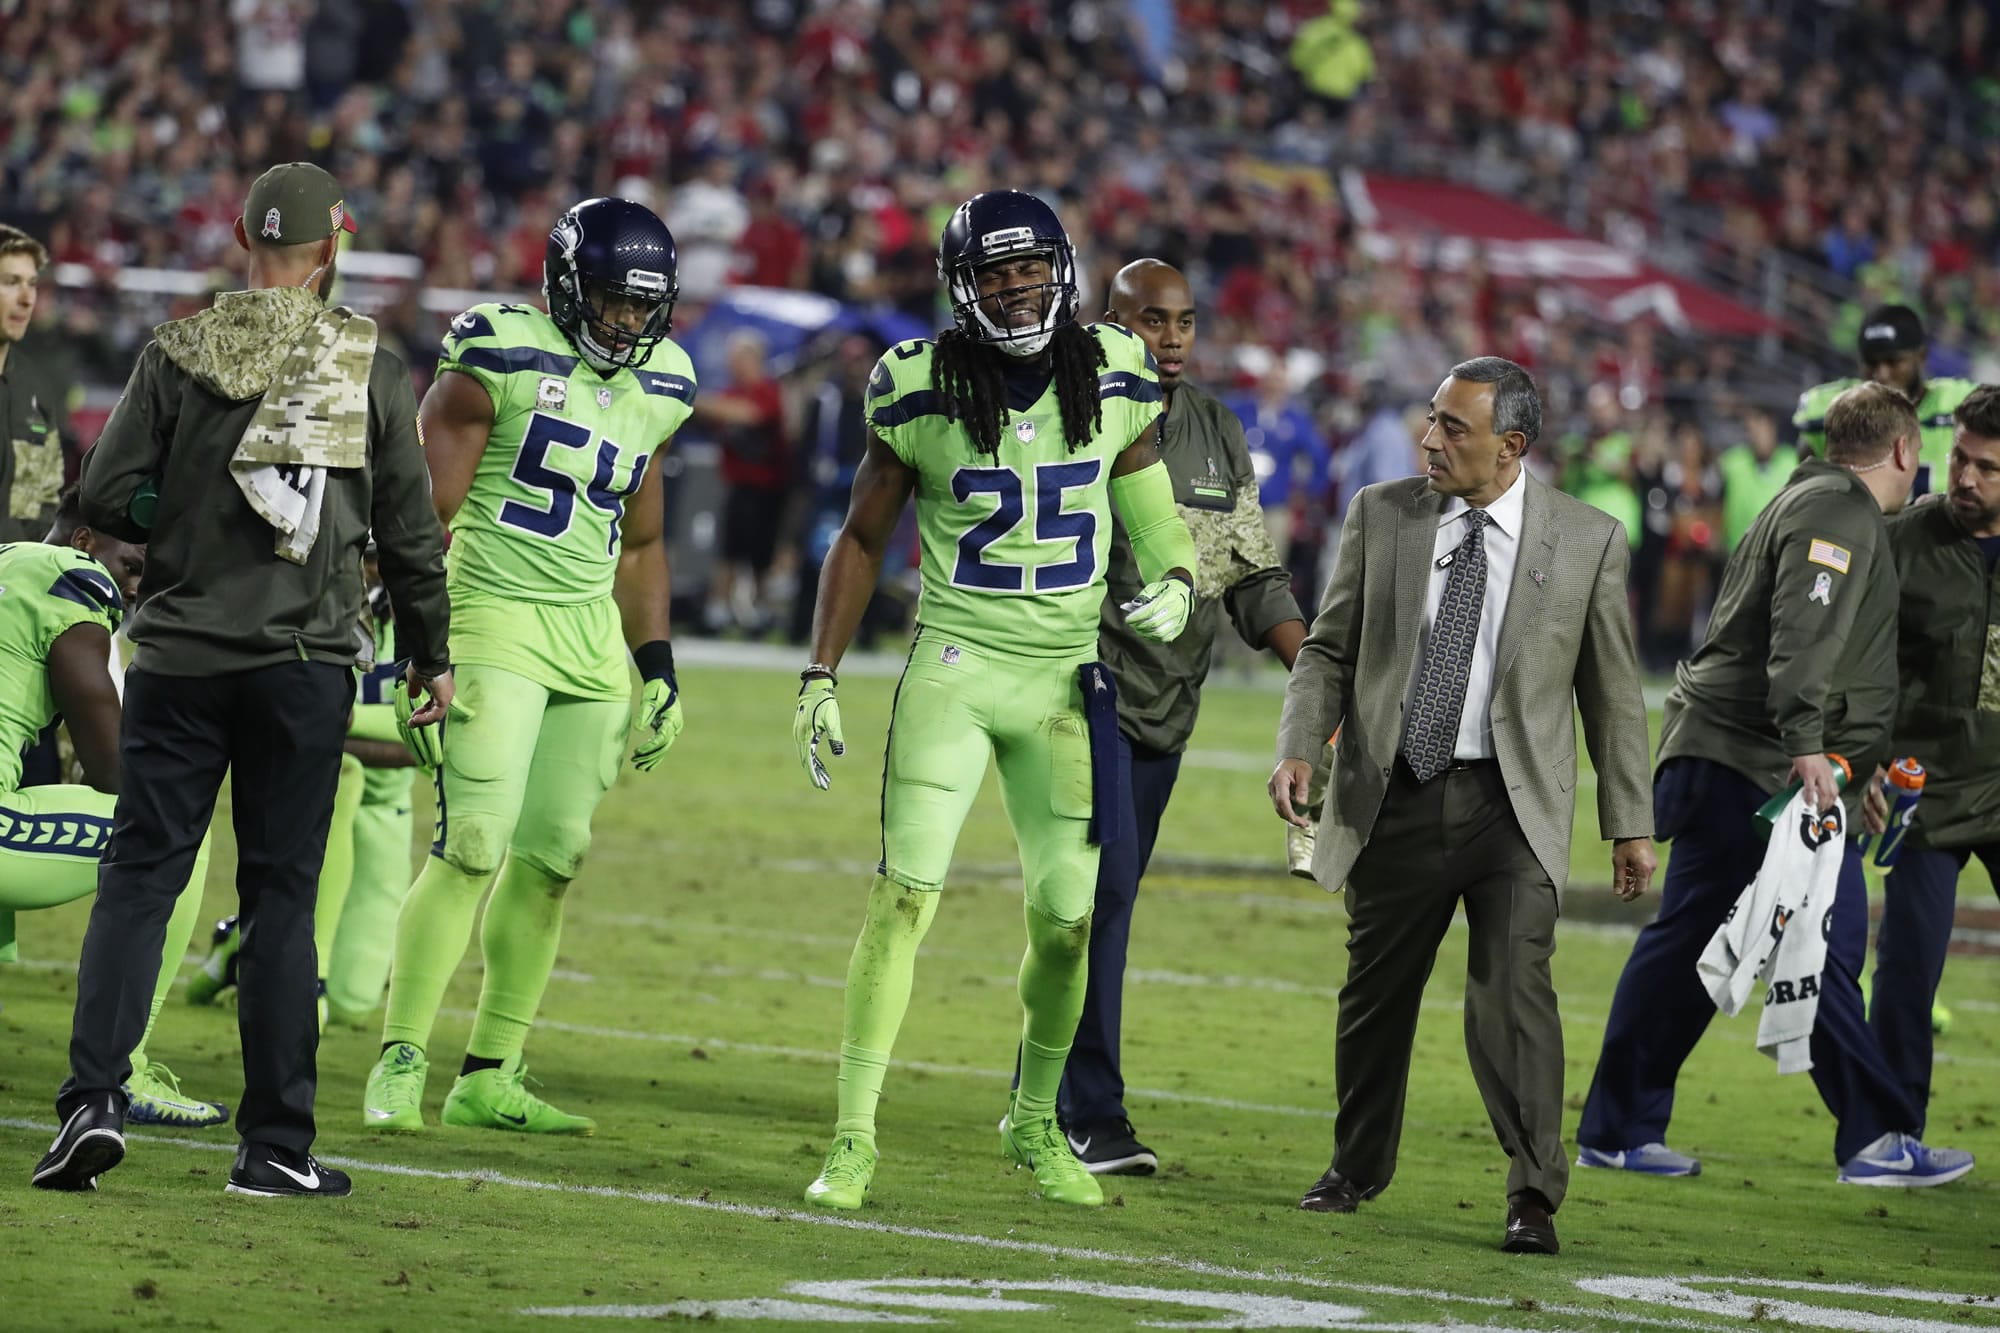 Seattle Seahawks cornerback Richard Sherman (25) leaves the game after an injury during the second half of an NFL football game, Thursday, Nov. 9, 2017, in Glendale, Ariz. Sherman did not return to the game after the injury.